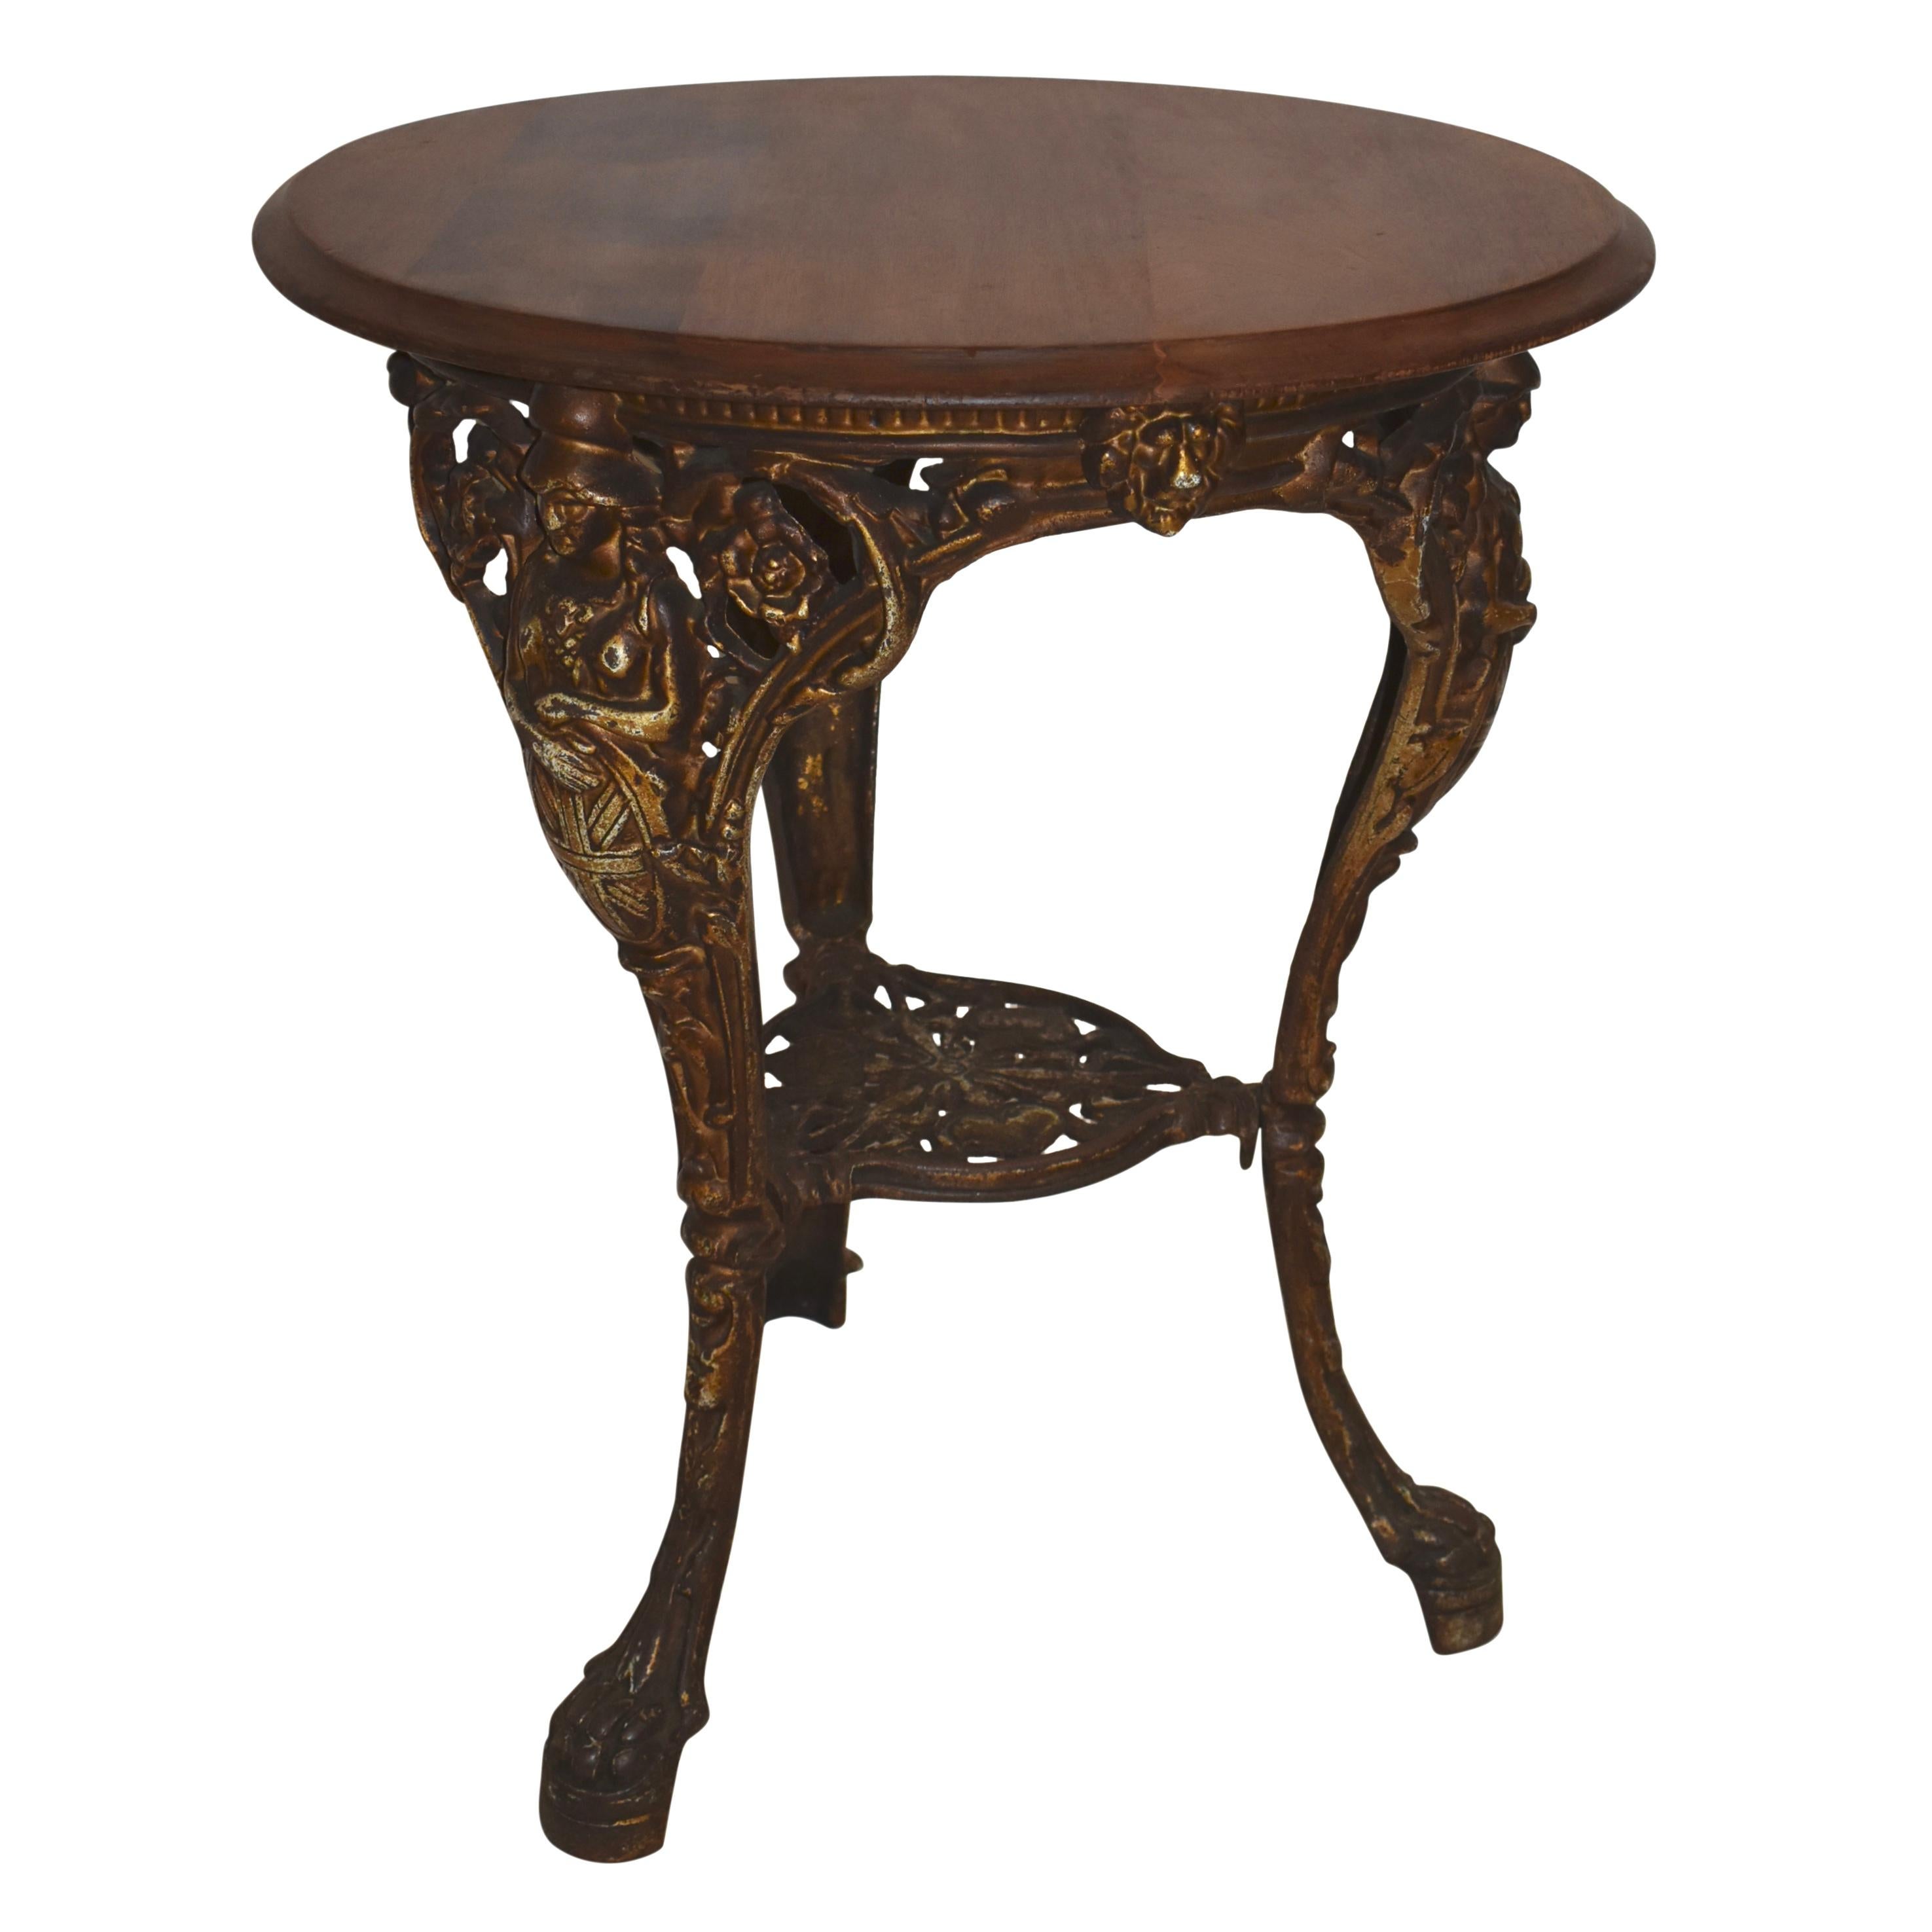 Comprised of a fruitwood top and iron base, this stunning side table features a refinished, beveled top secured to a tripod base with a lower pierced tier. The three cabriole legs terminate in paw feet. Britain's classic icon known as Britannia,